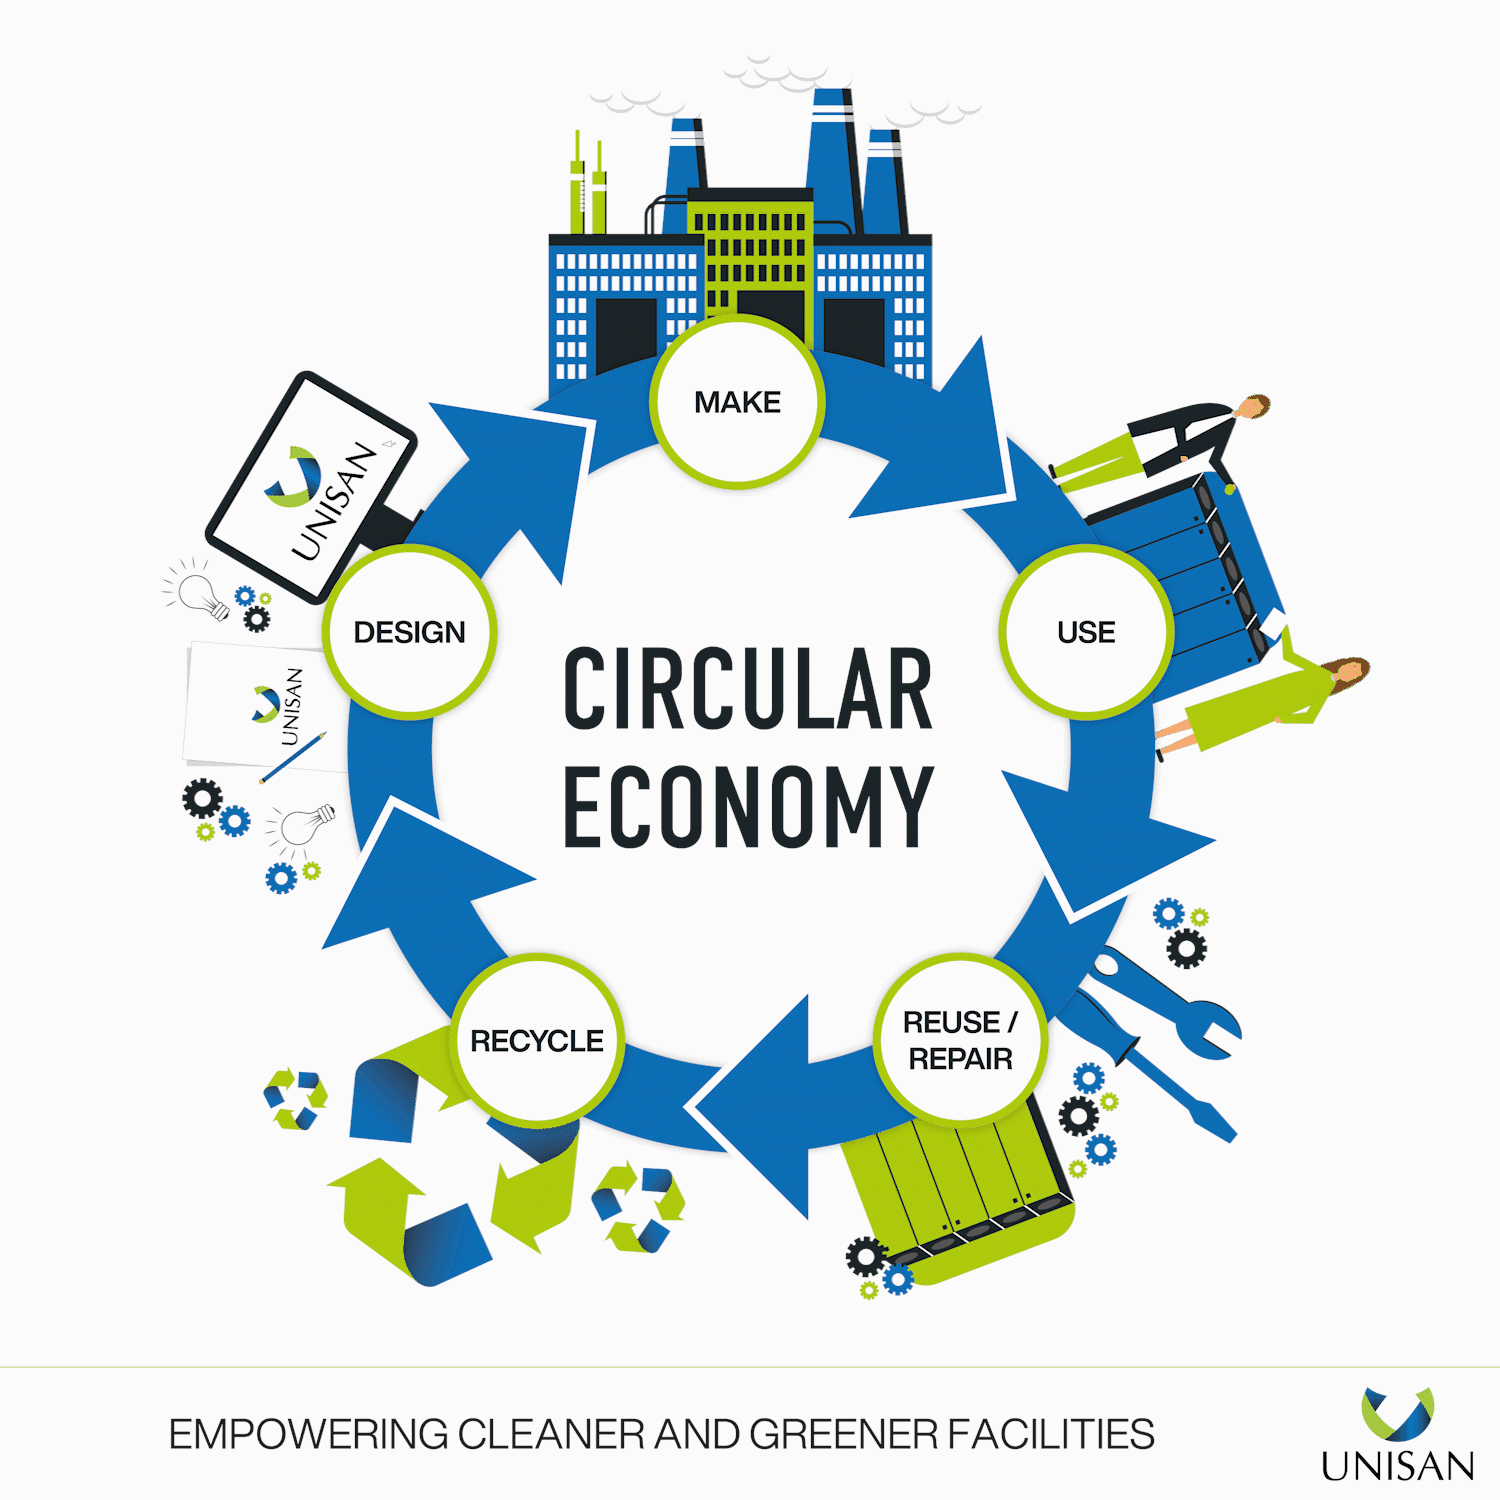 a circular economy will help the environment by preserving earths resources